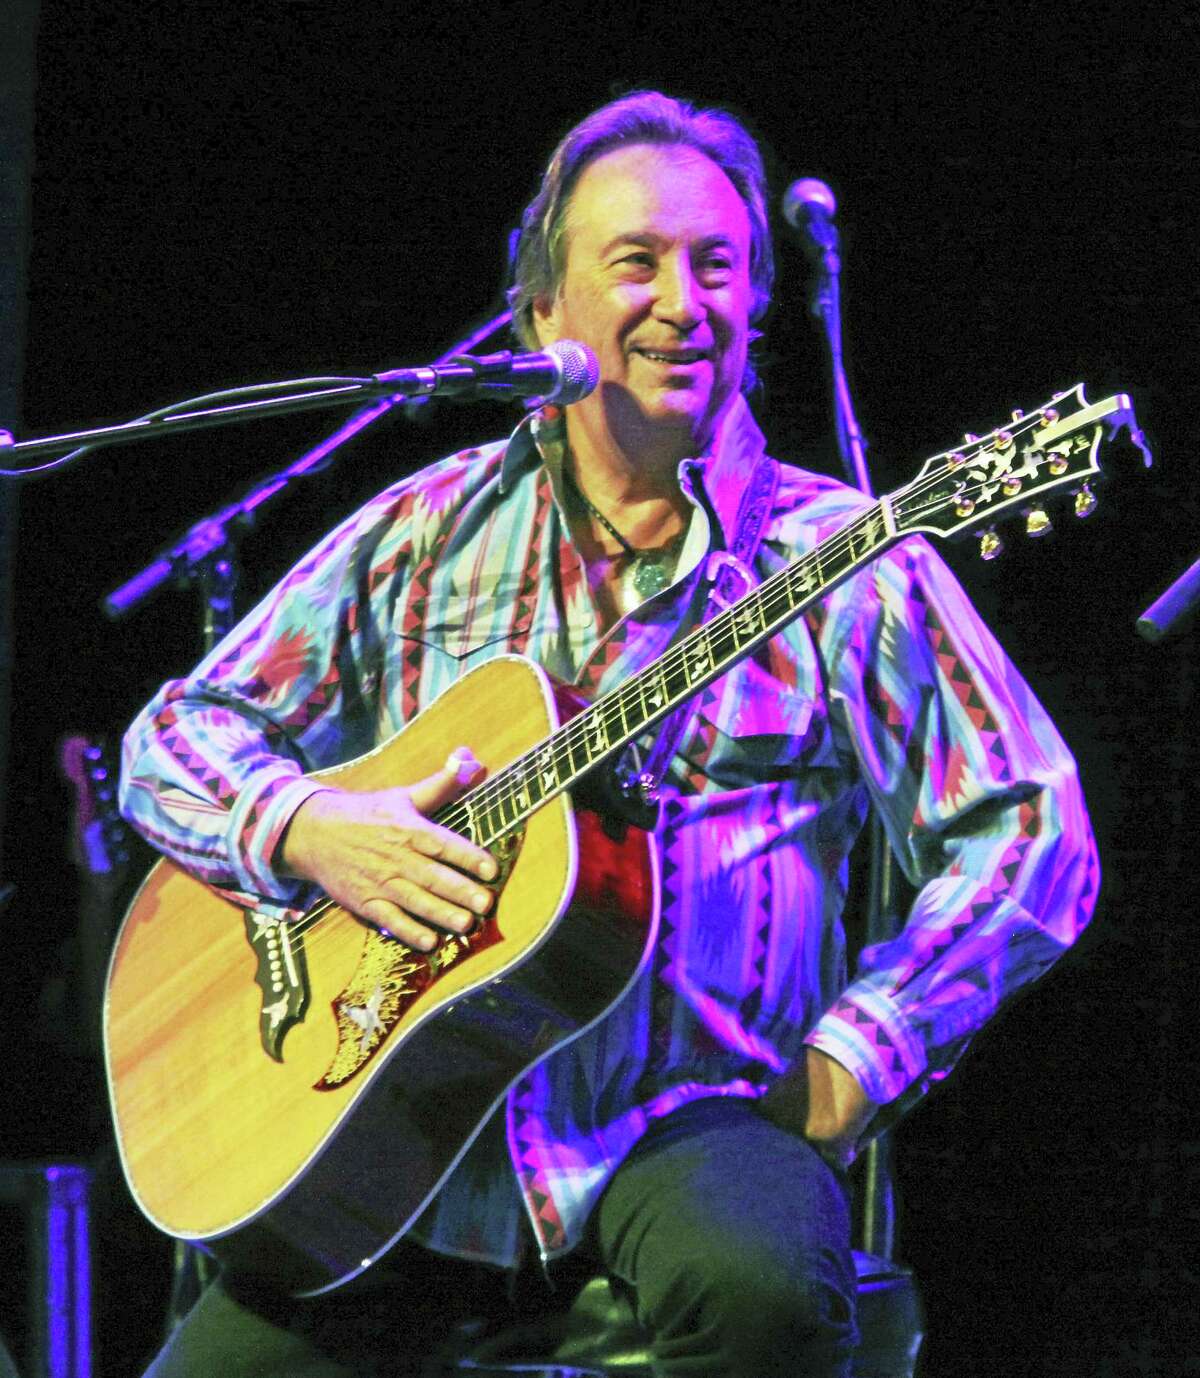 Contributed photoJim Messina, known for his work with Kenny Loggins in Loggins and Messina as well as Buffalo Springfield and Poco, will perform at Infinity Music Hall in Norfolk on July 15.